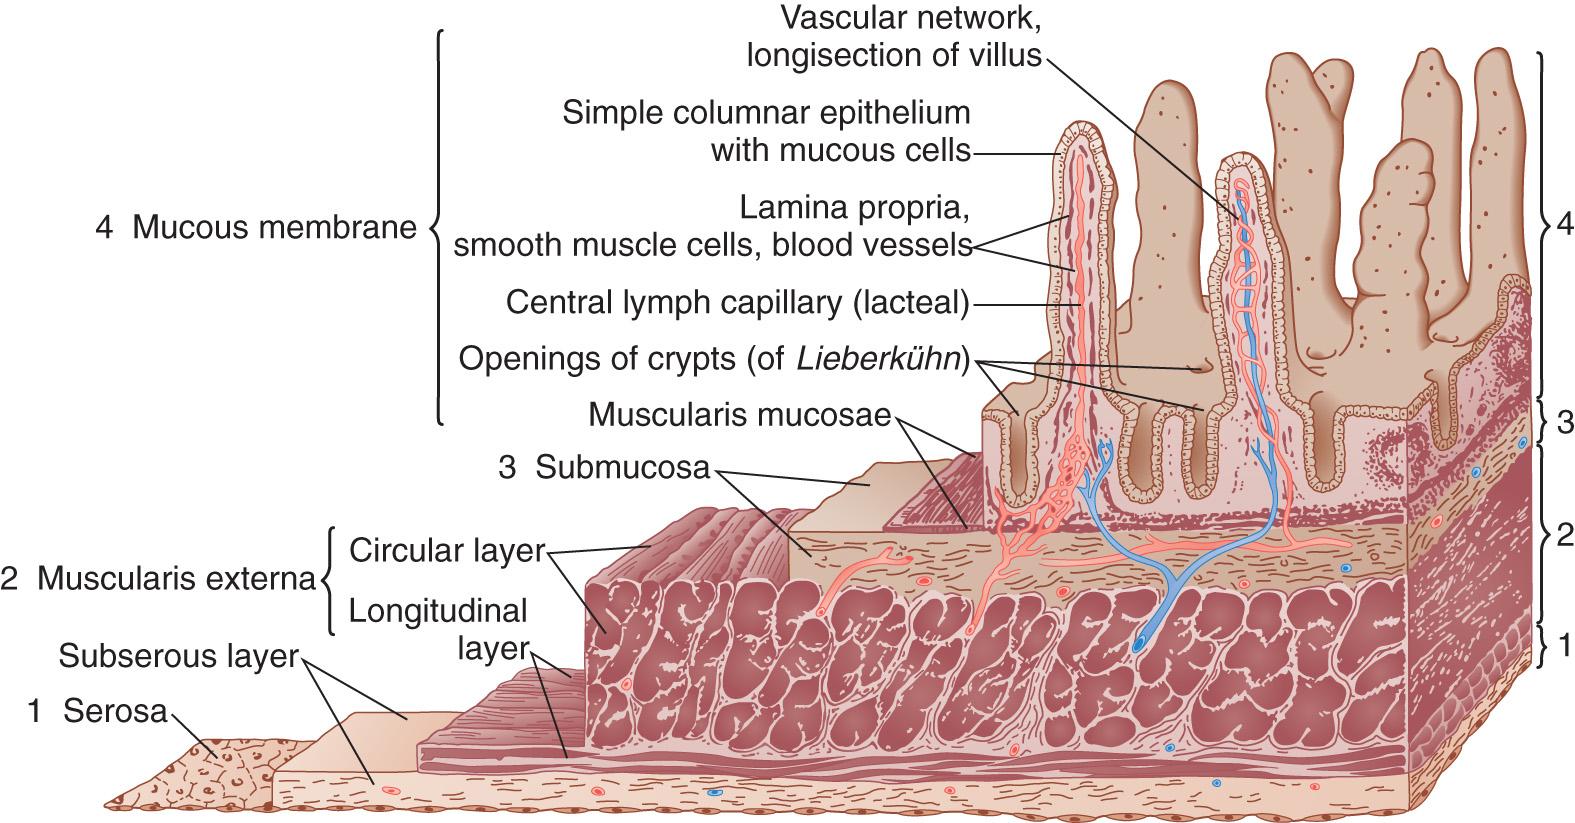 FIGURE 71.3, There are four main layers of the small intestine. The outermost layer is the serosa followed by the subserosa. Next is the muscularis externa, which is made up of an outer longitudinal and an inner circular layer. The submucosa layer is next and the innermost layer is the mucous membrane, which consists of the intestinal villi.